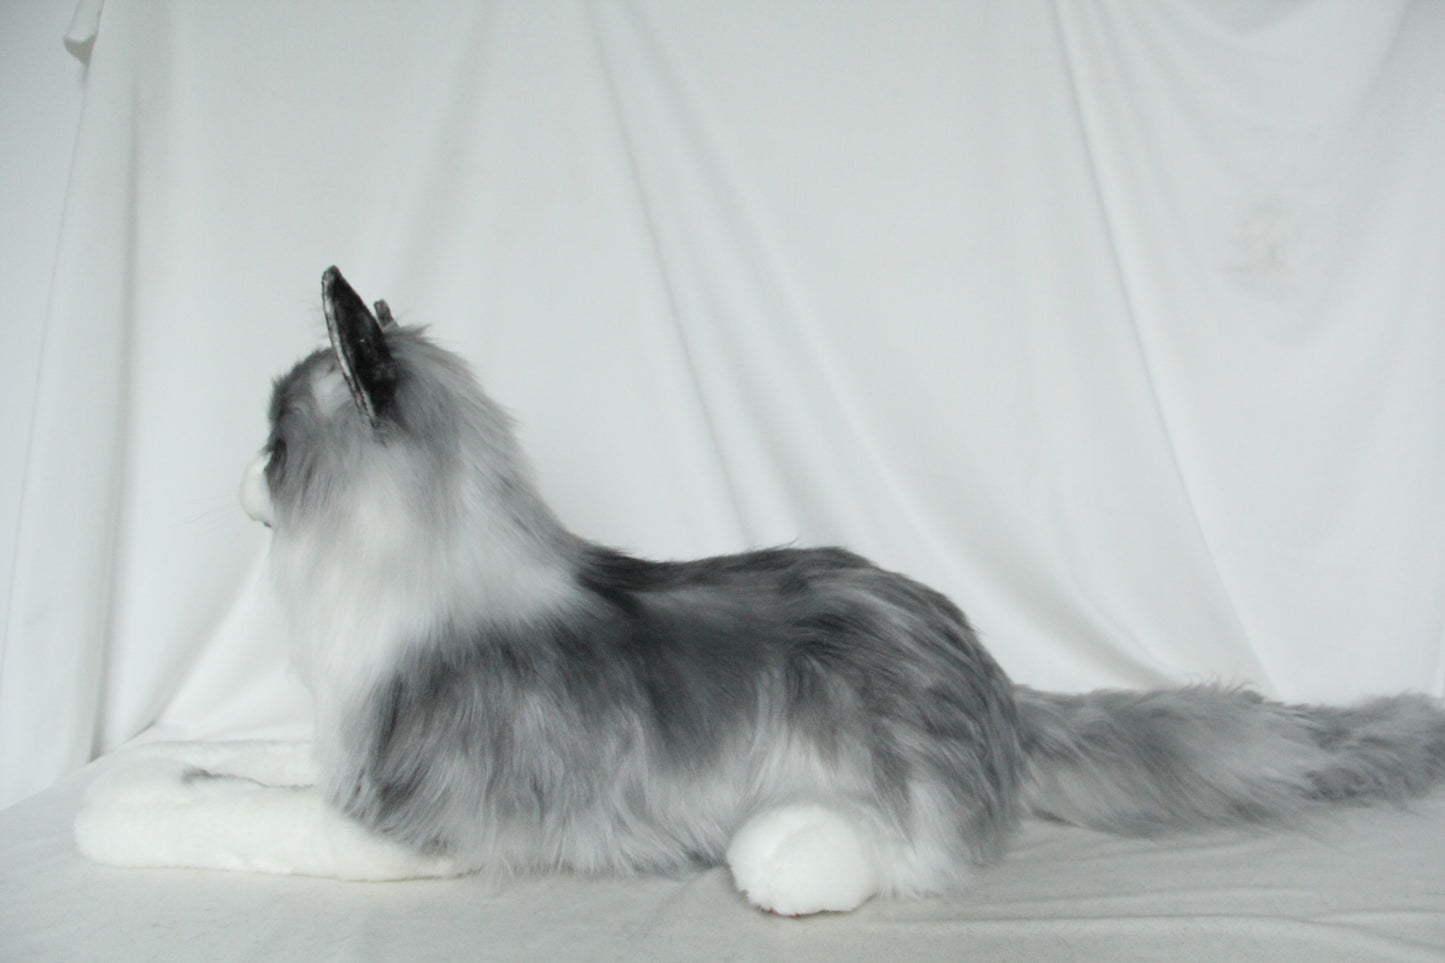 NO.37  55cm  Long-haired gray cat in lying position